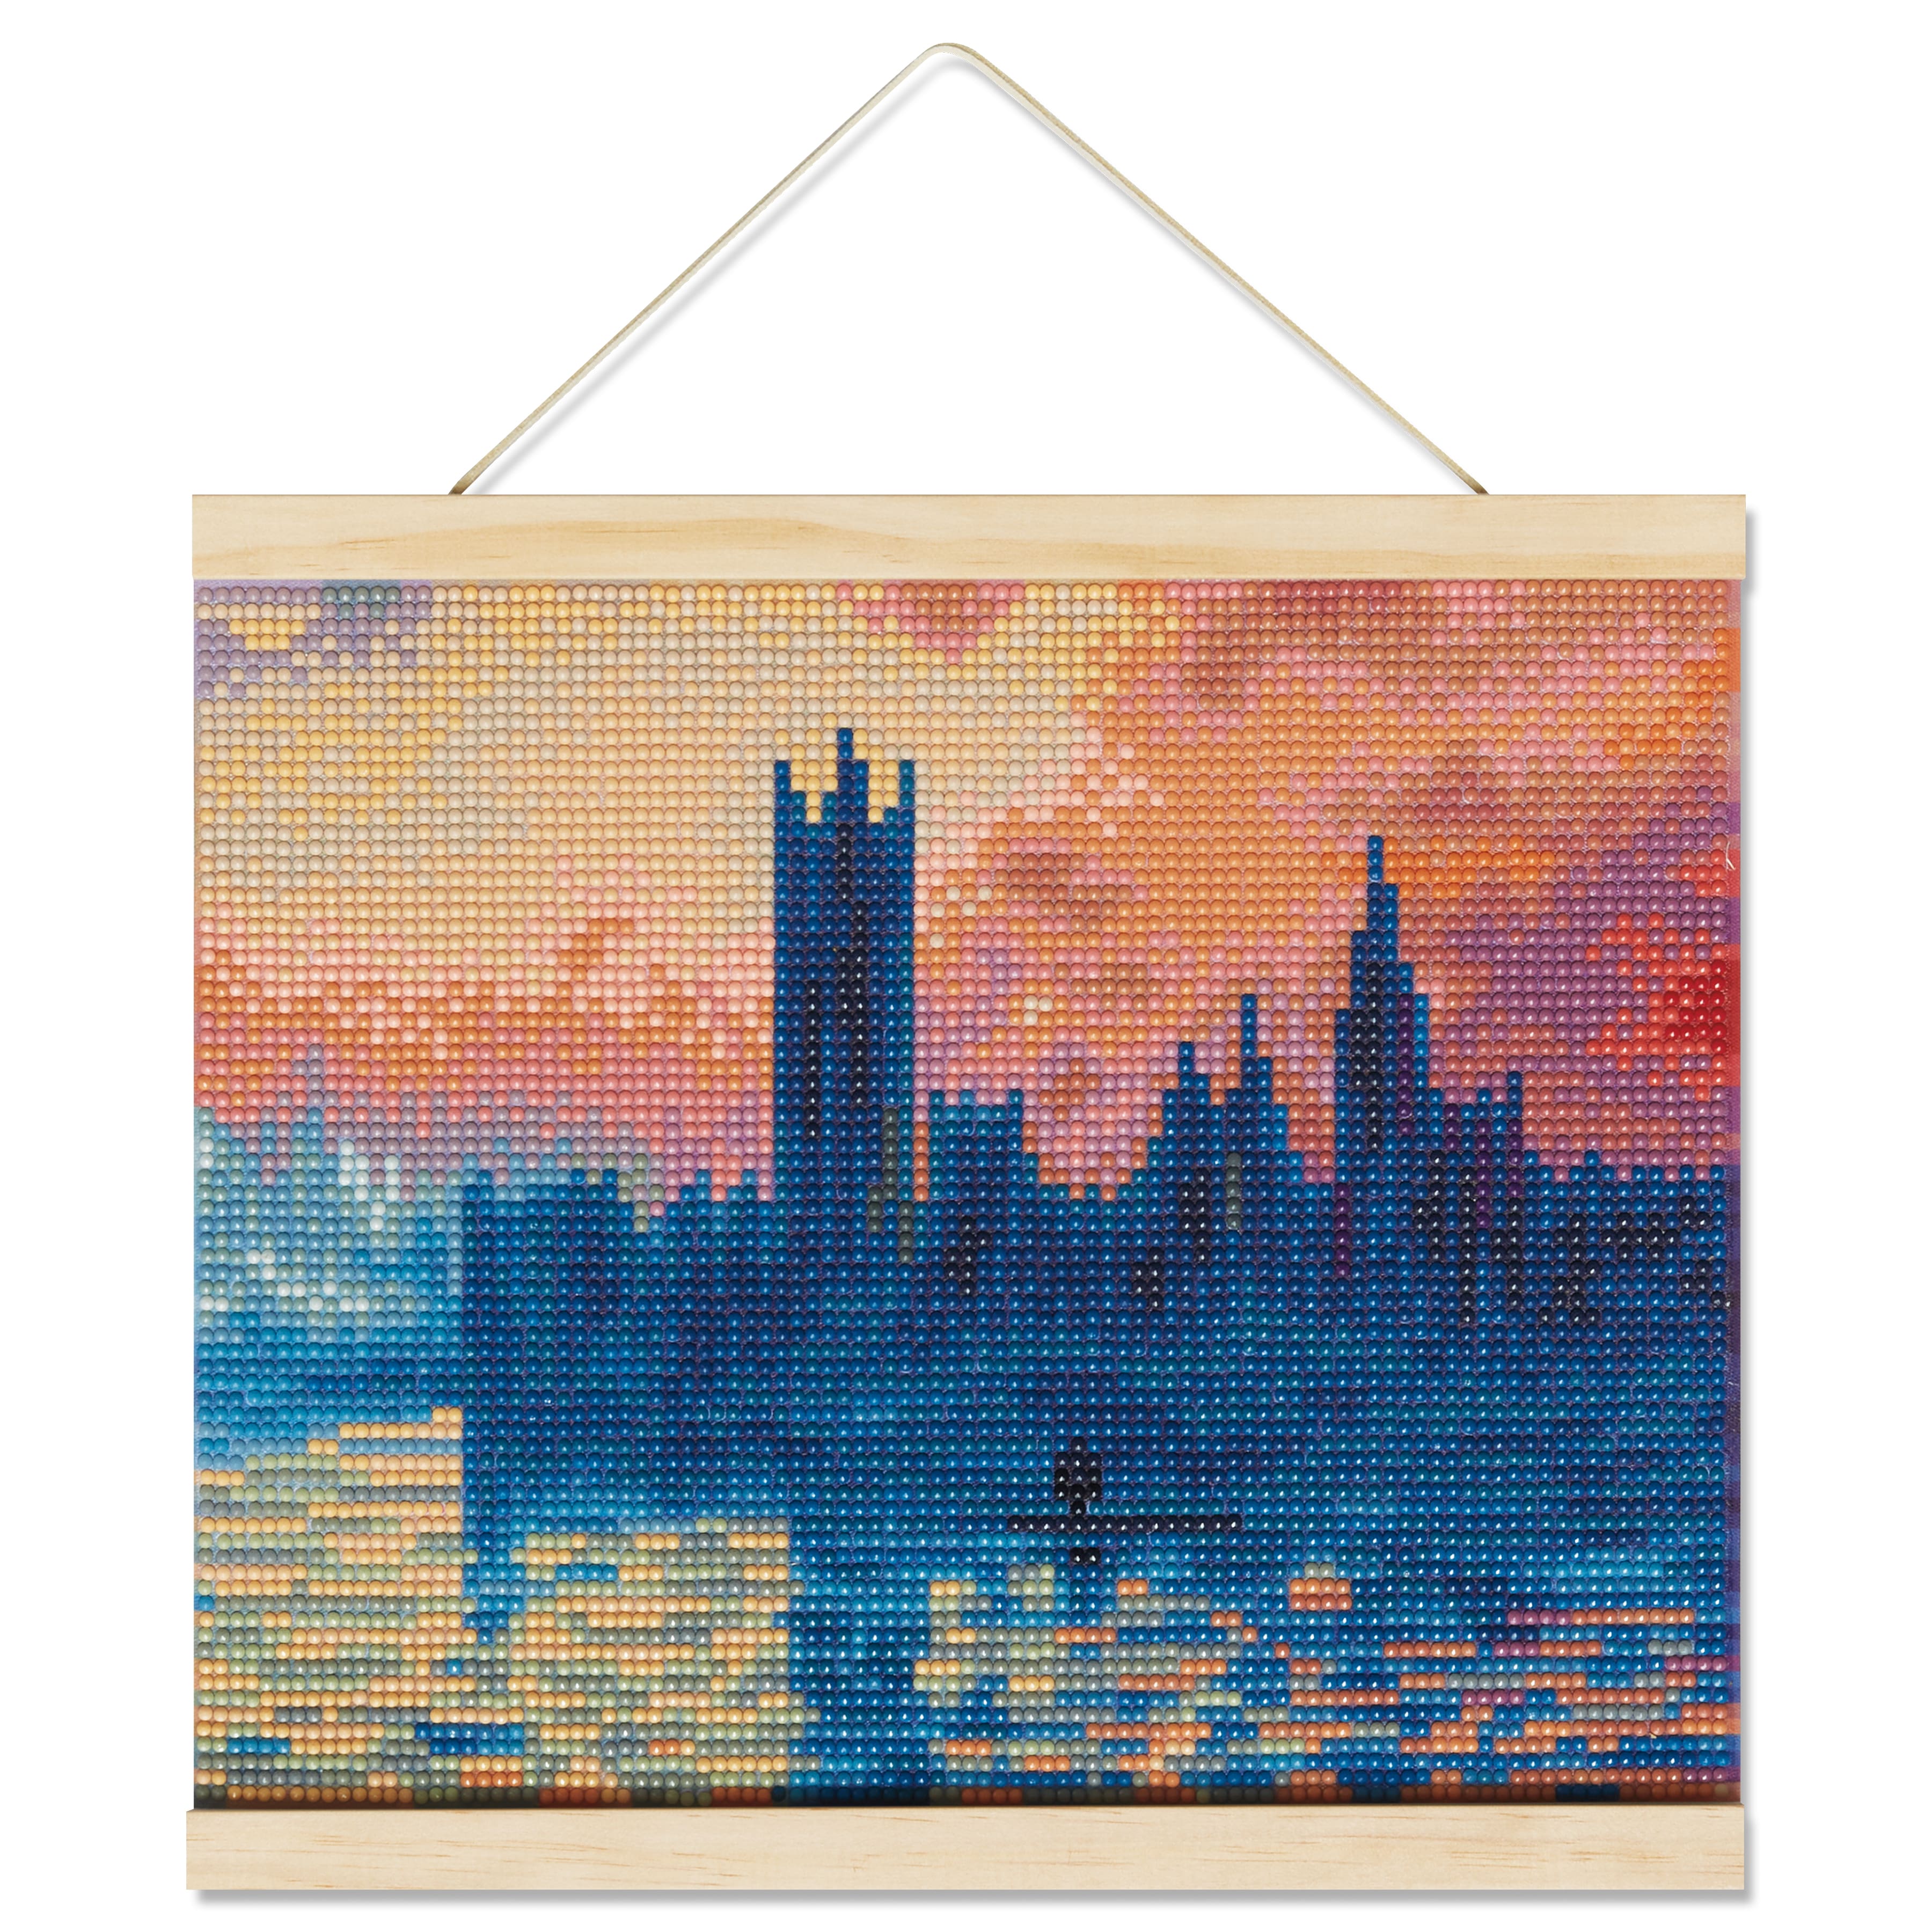 Houses of Parliament with Frame Diamond Art Kit by Make Market&#xAE;